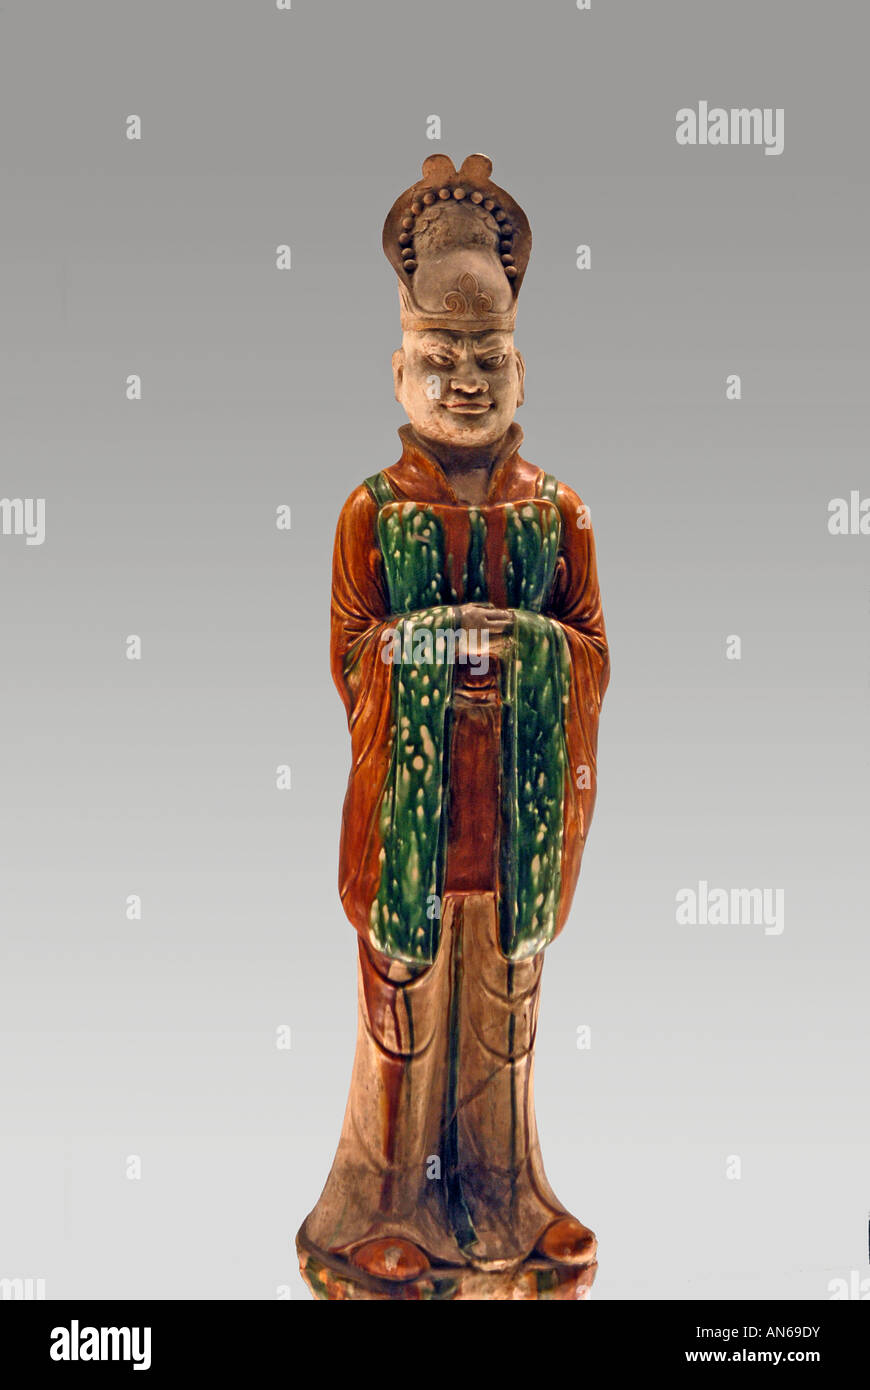 Shanghai Museum P R of China Tang Dynasty Figurine Stock Photo